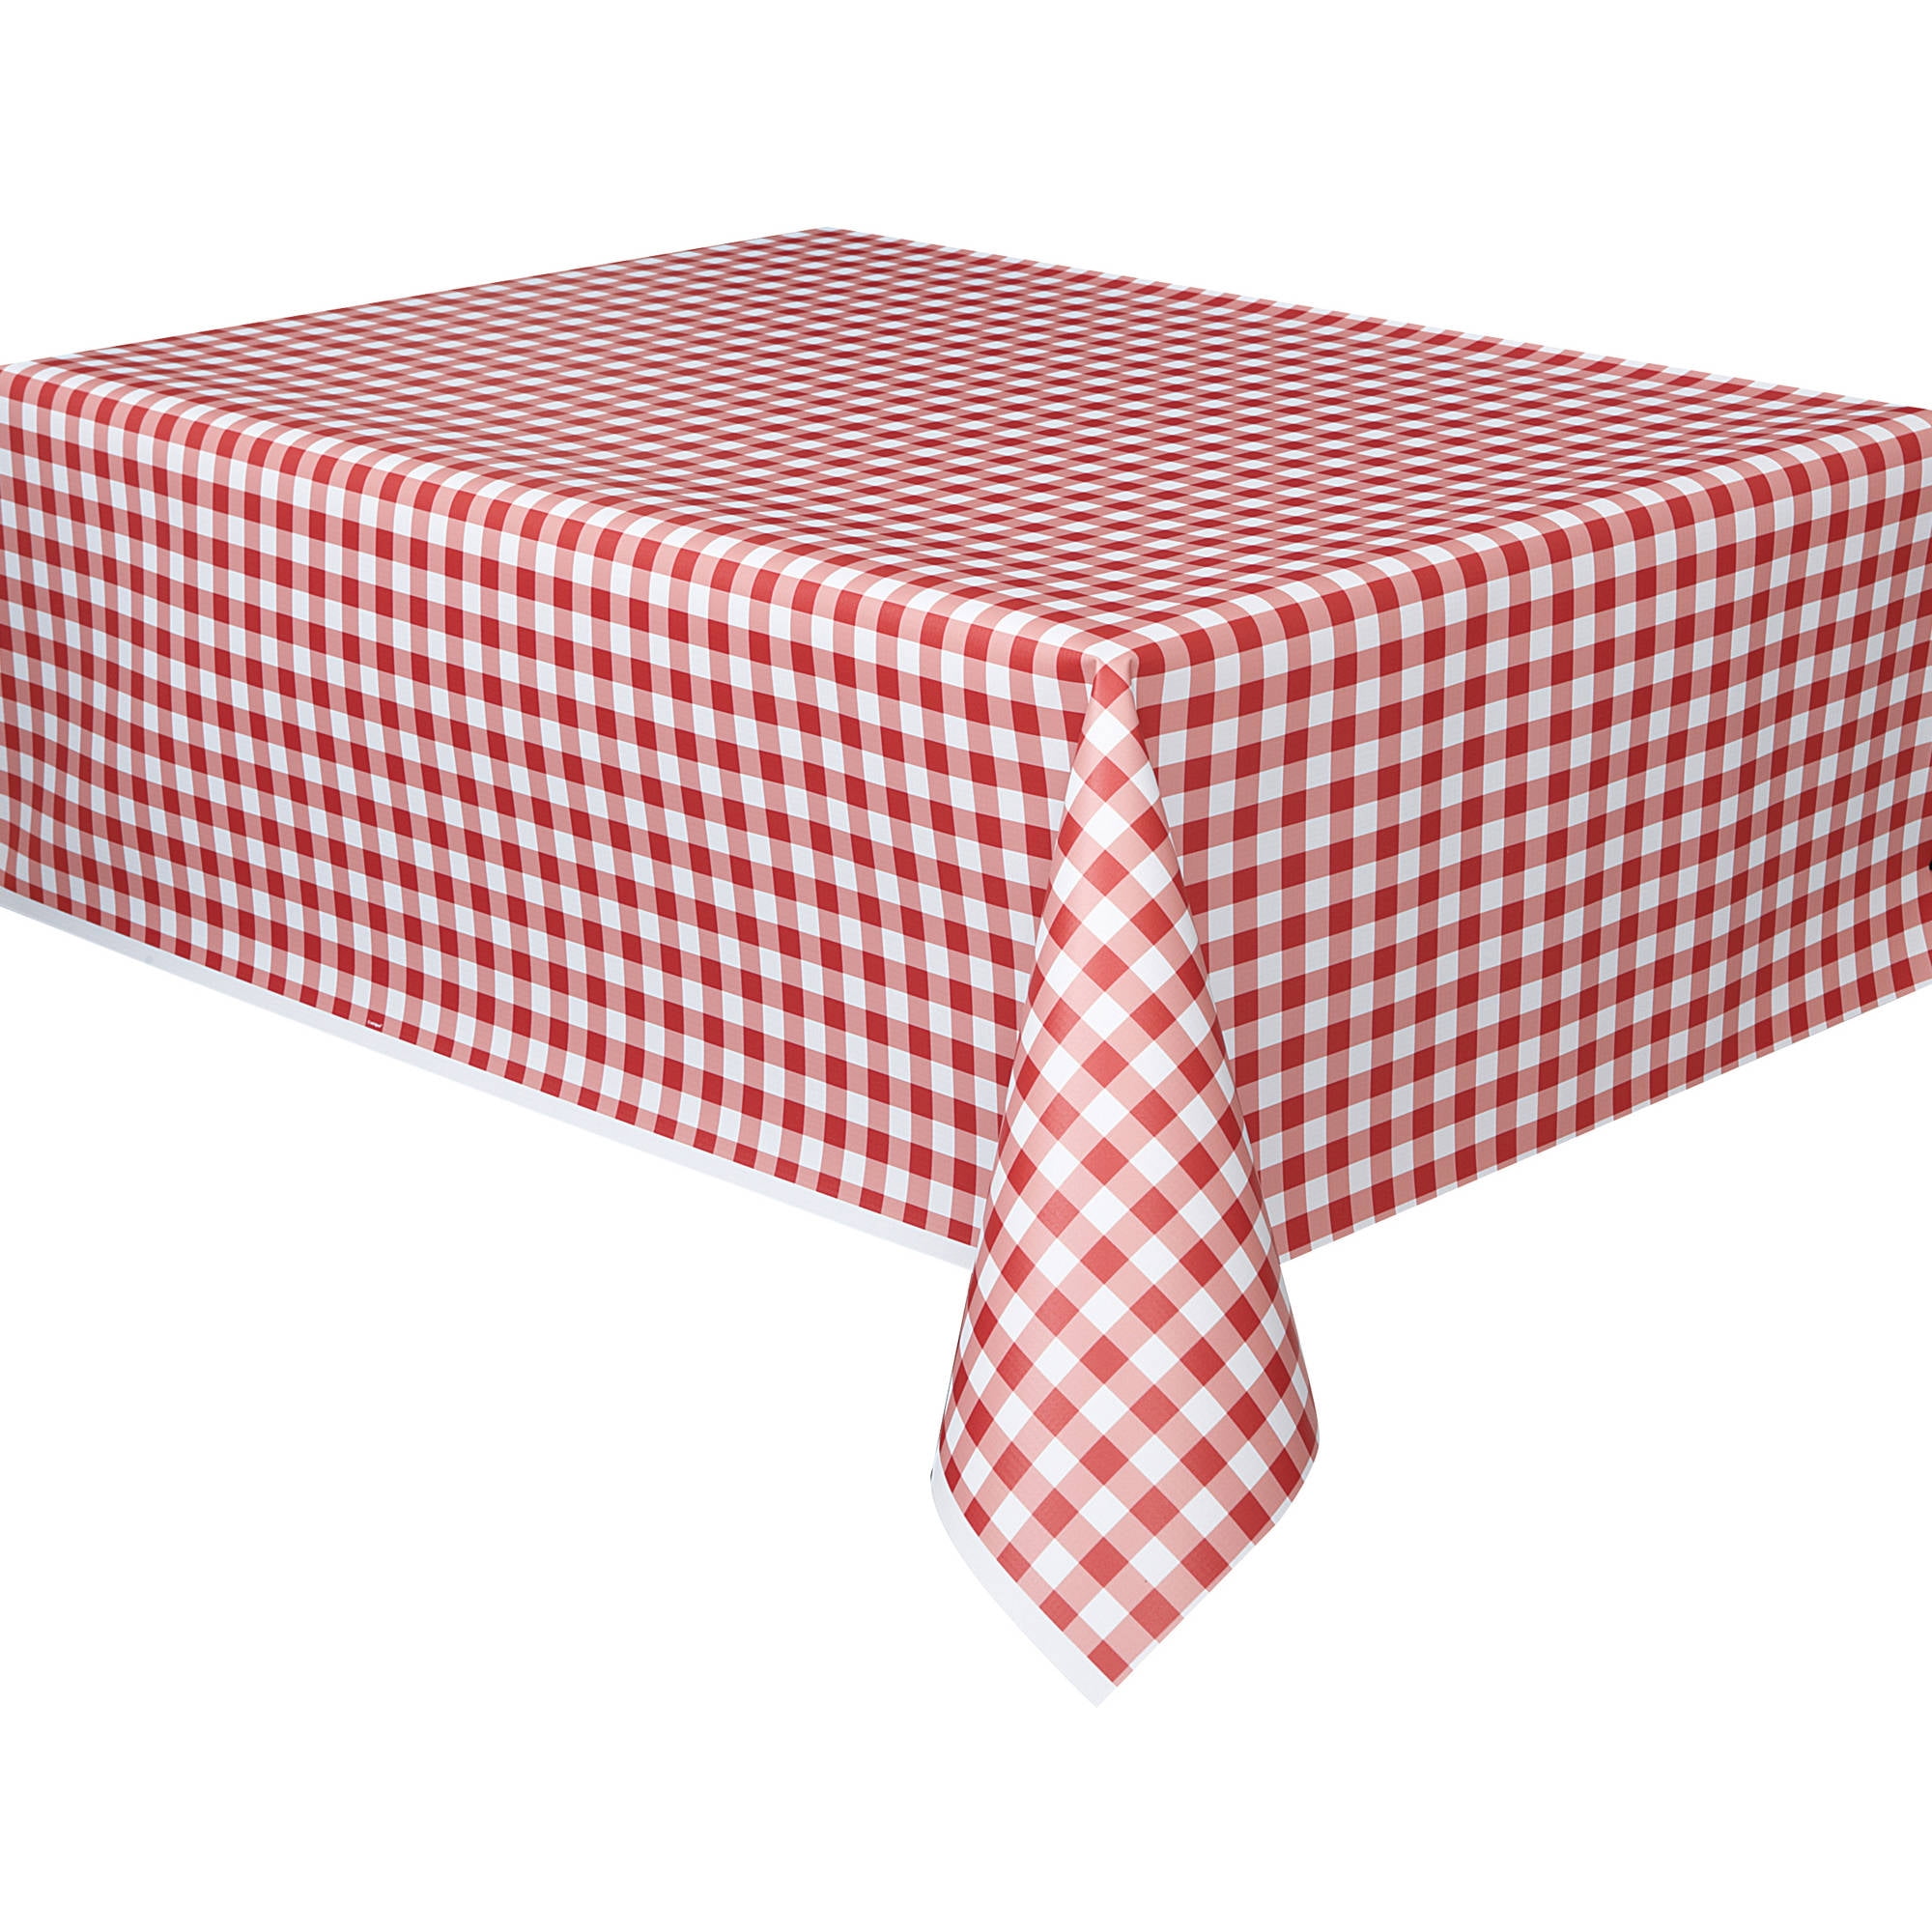 FREE SHIPPING 12 Pack Red White Checked Gingham Plastic Tablecloth 54" X 108" 